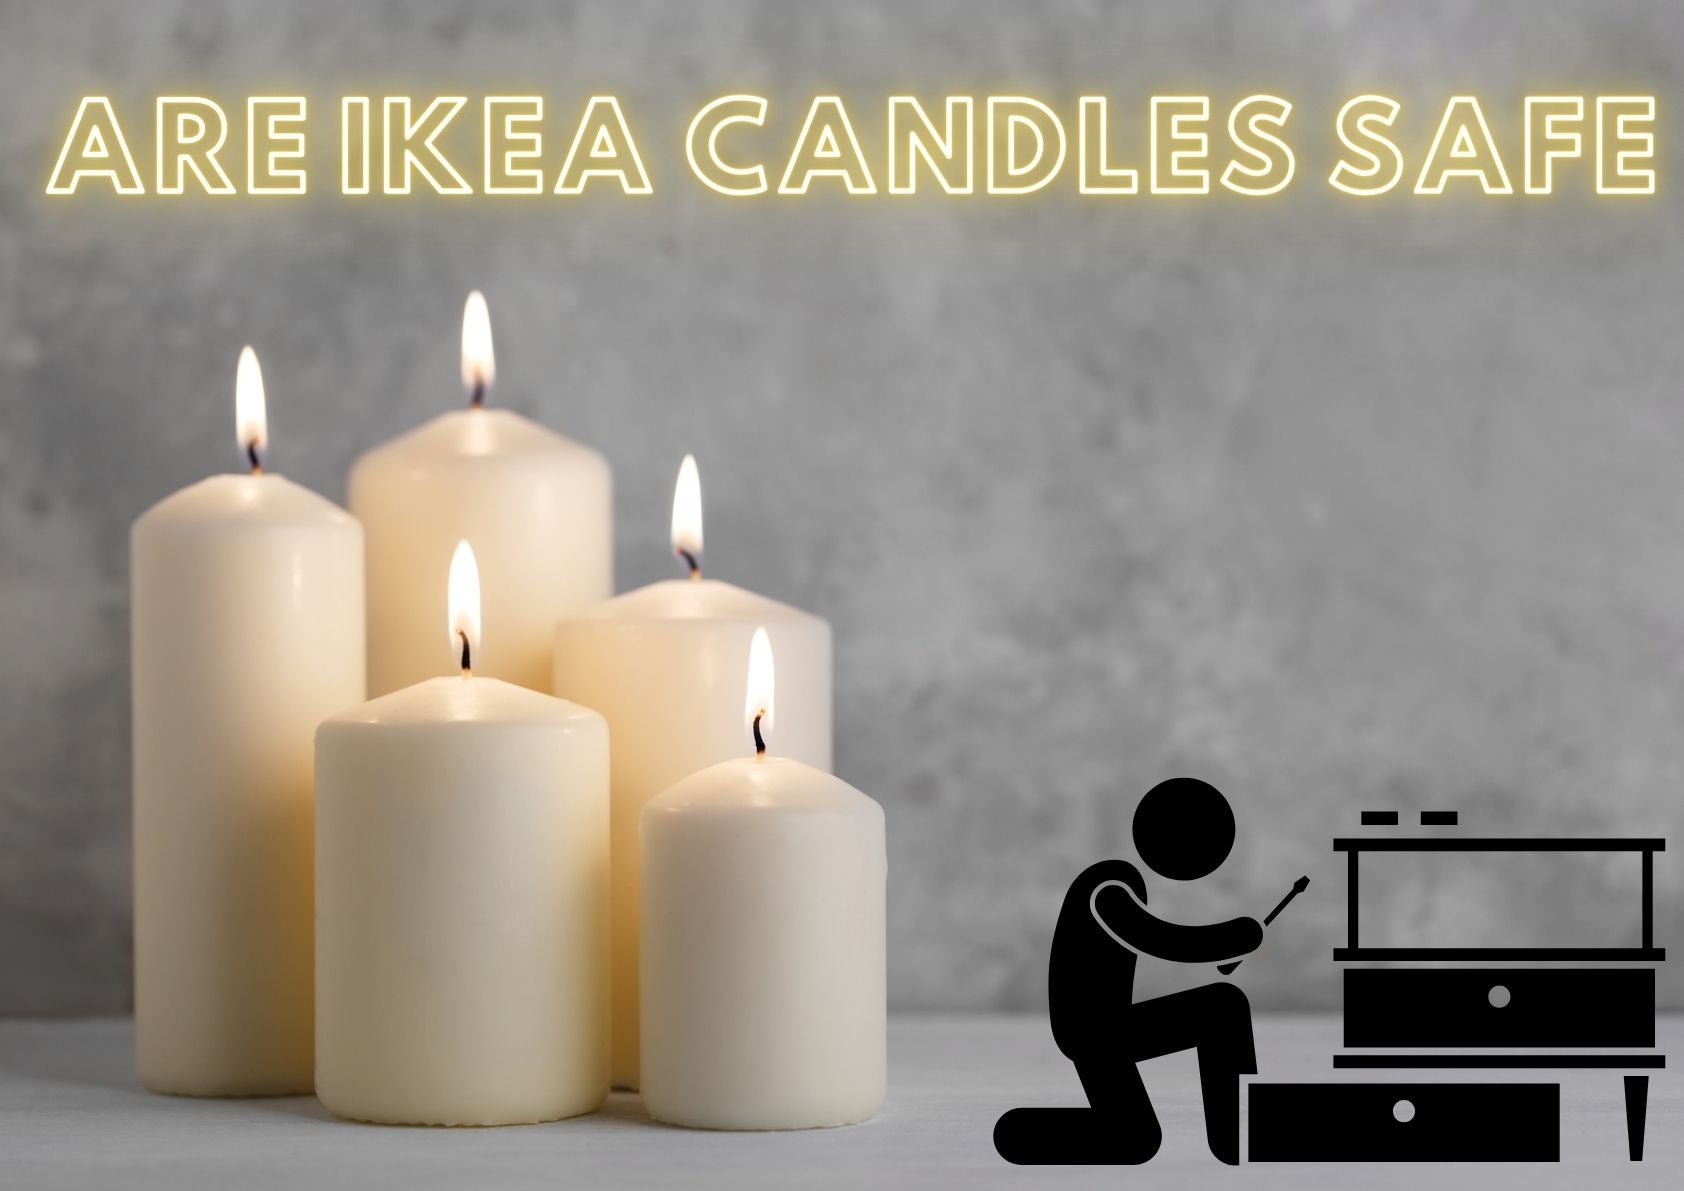 Are ikea candles safe